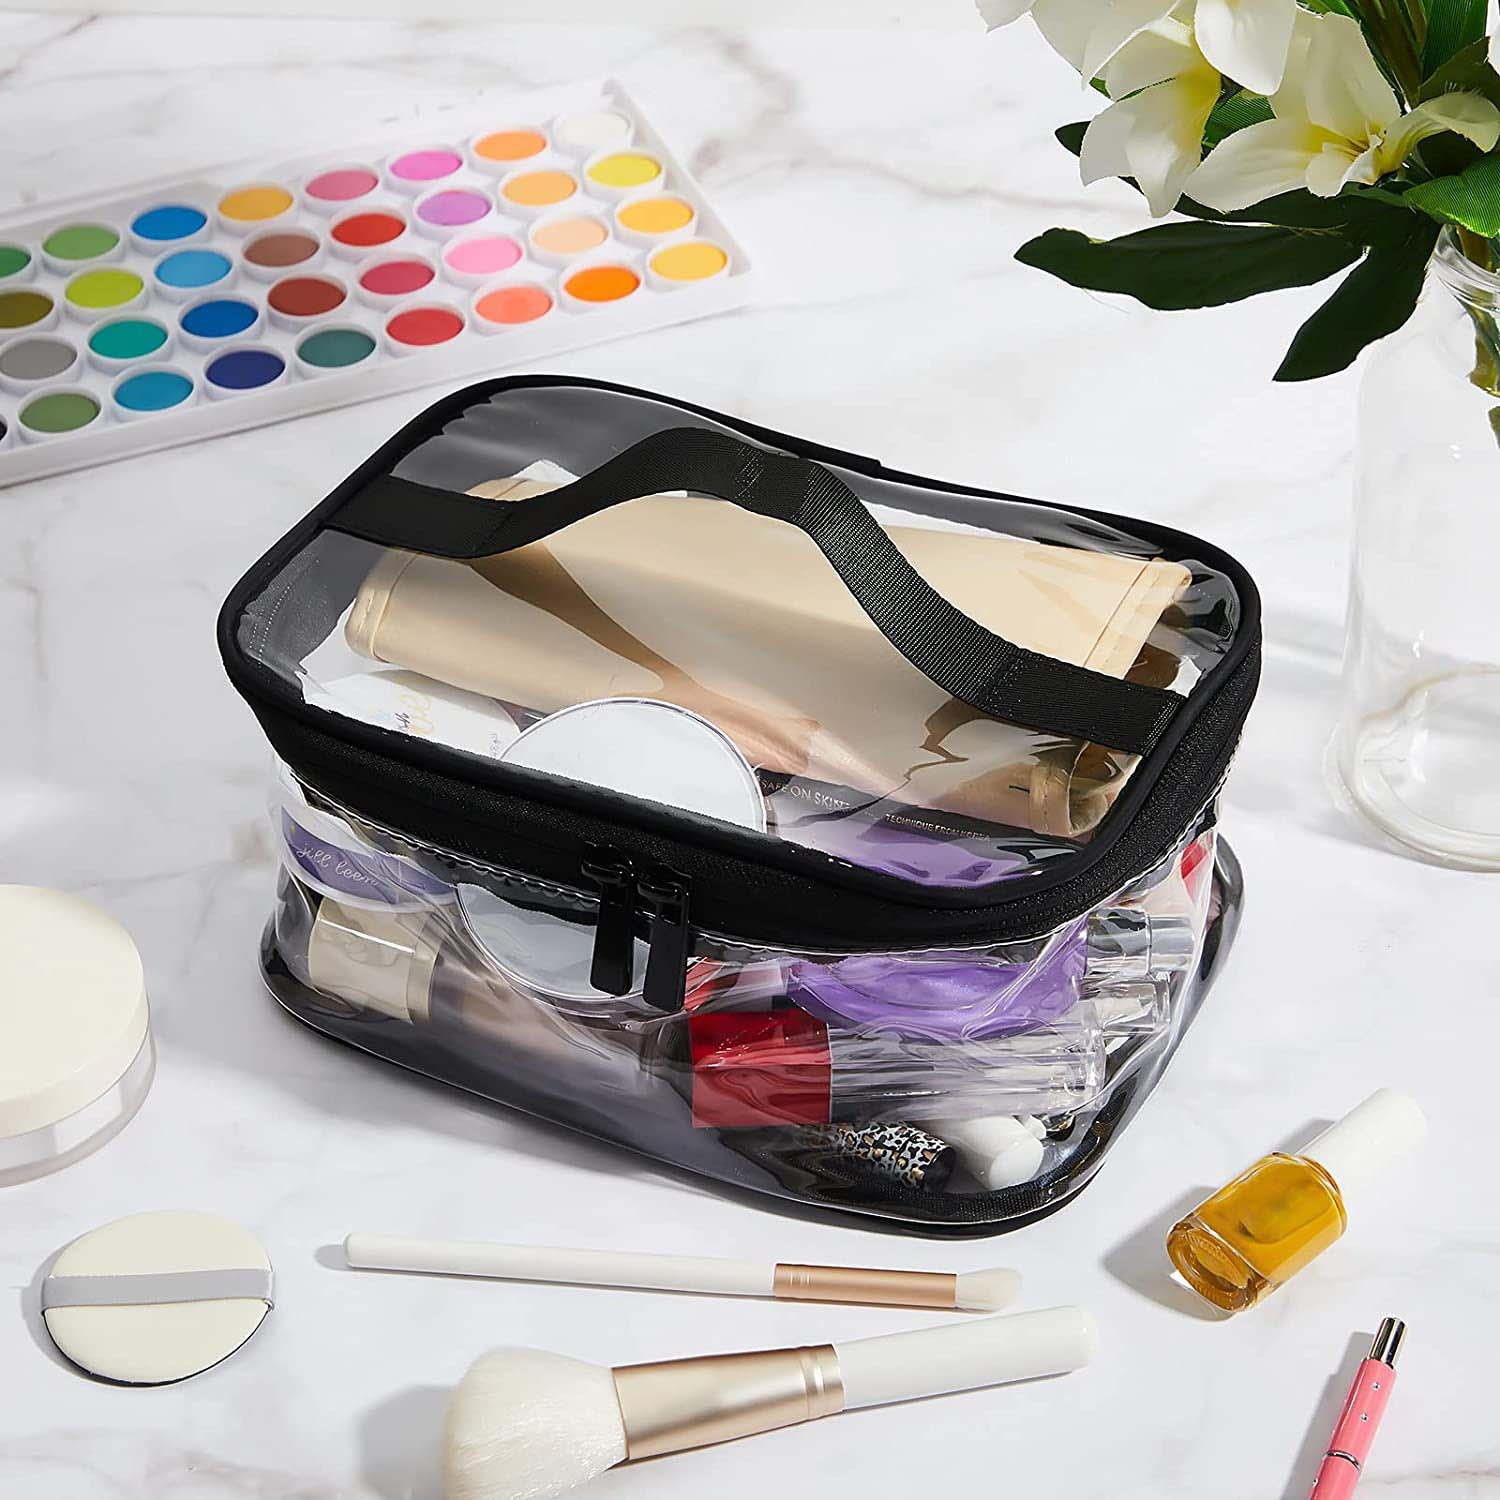 waterproof transparent pvc customizable cosmetic bags Women large capacity Makeup Bag Toiletry Pouch